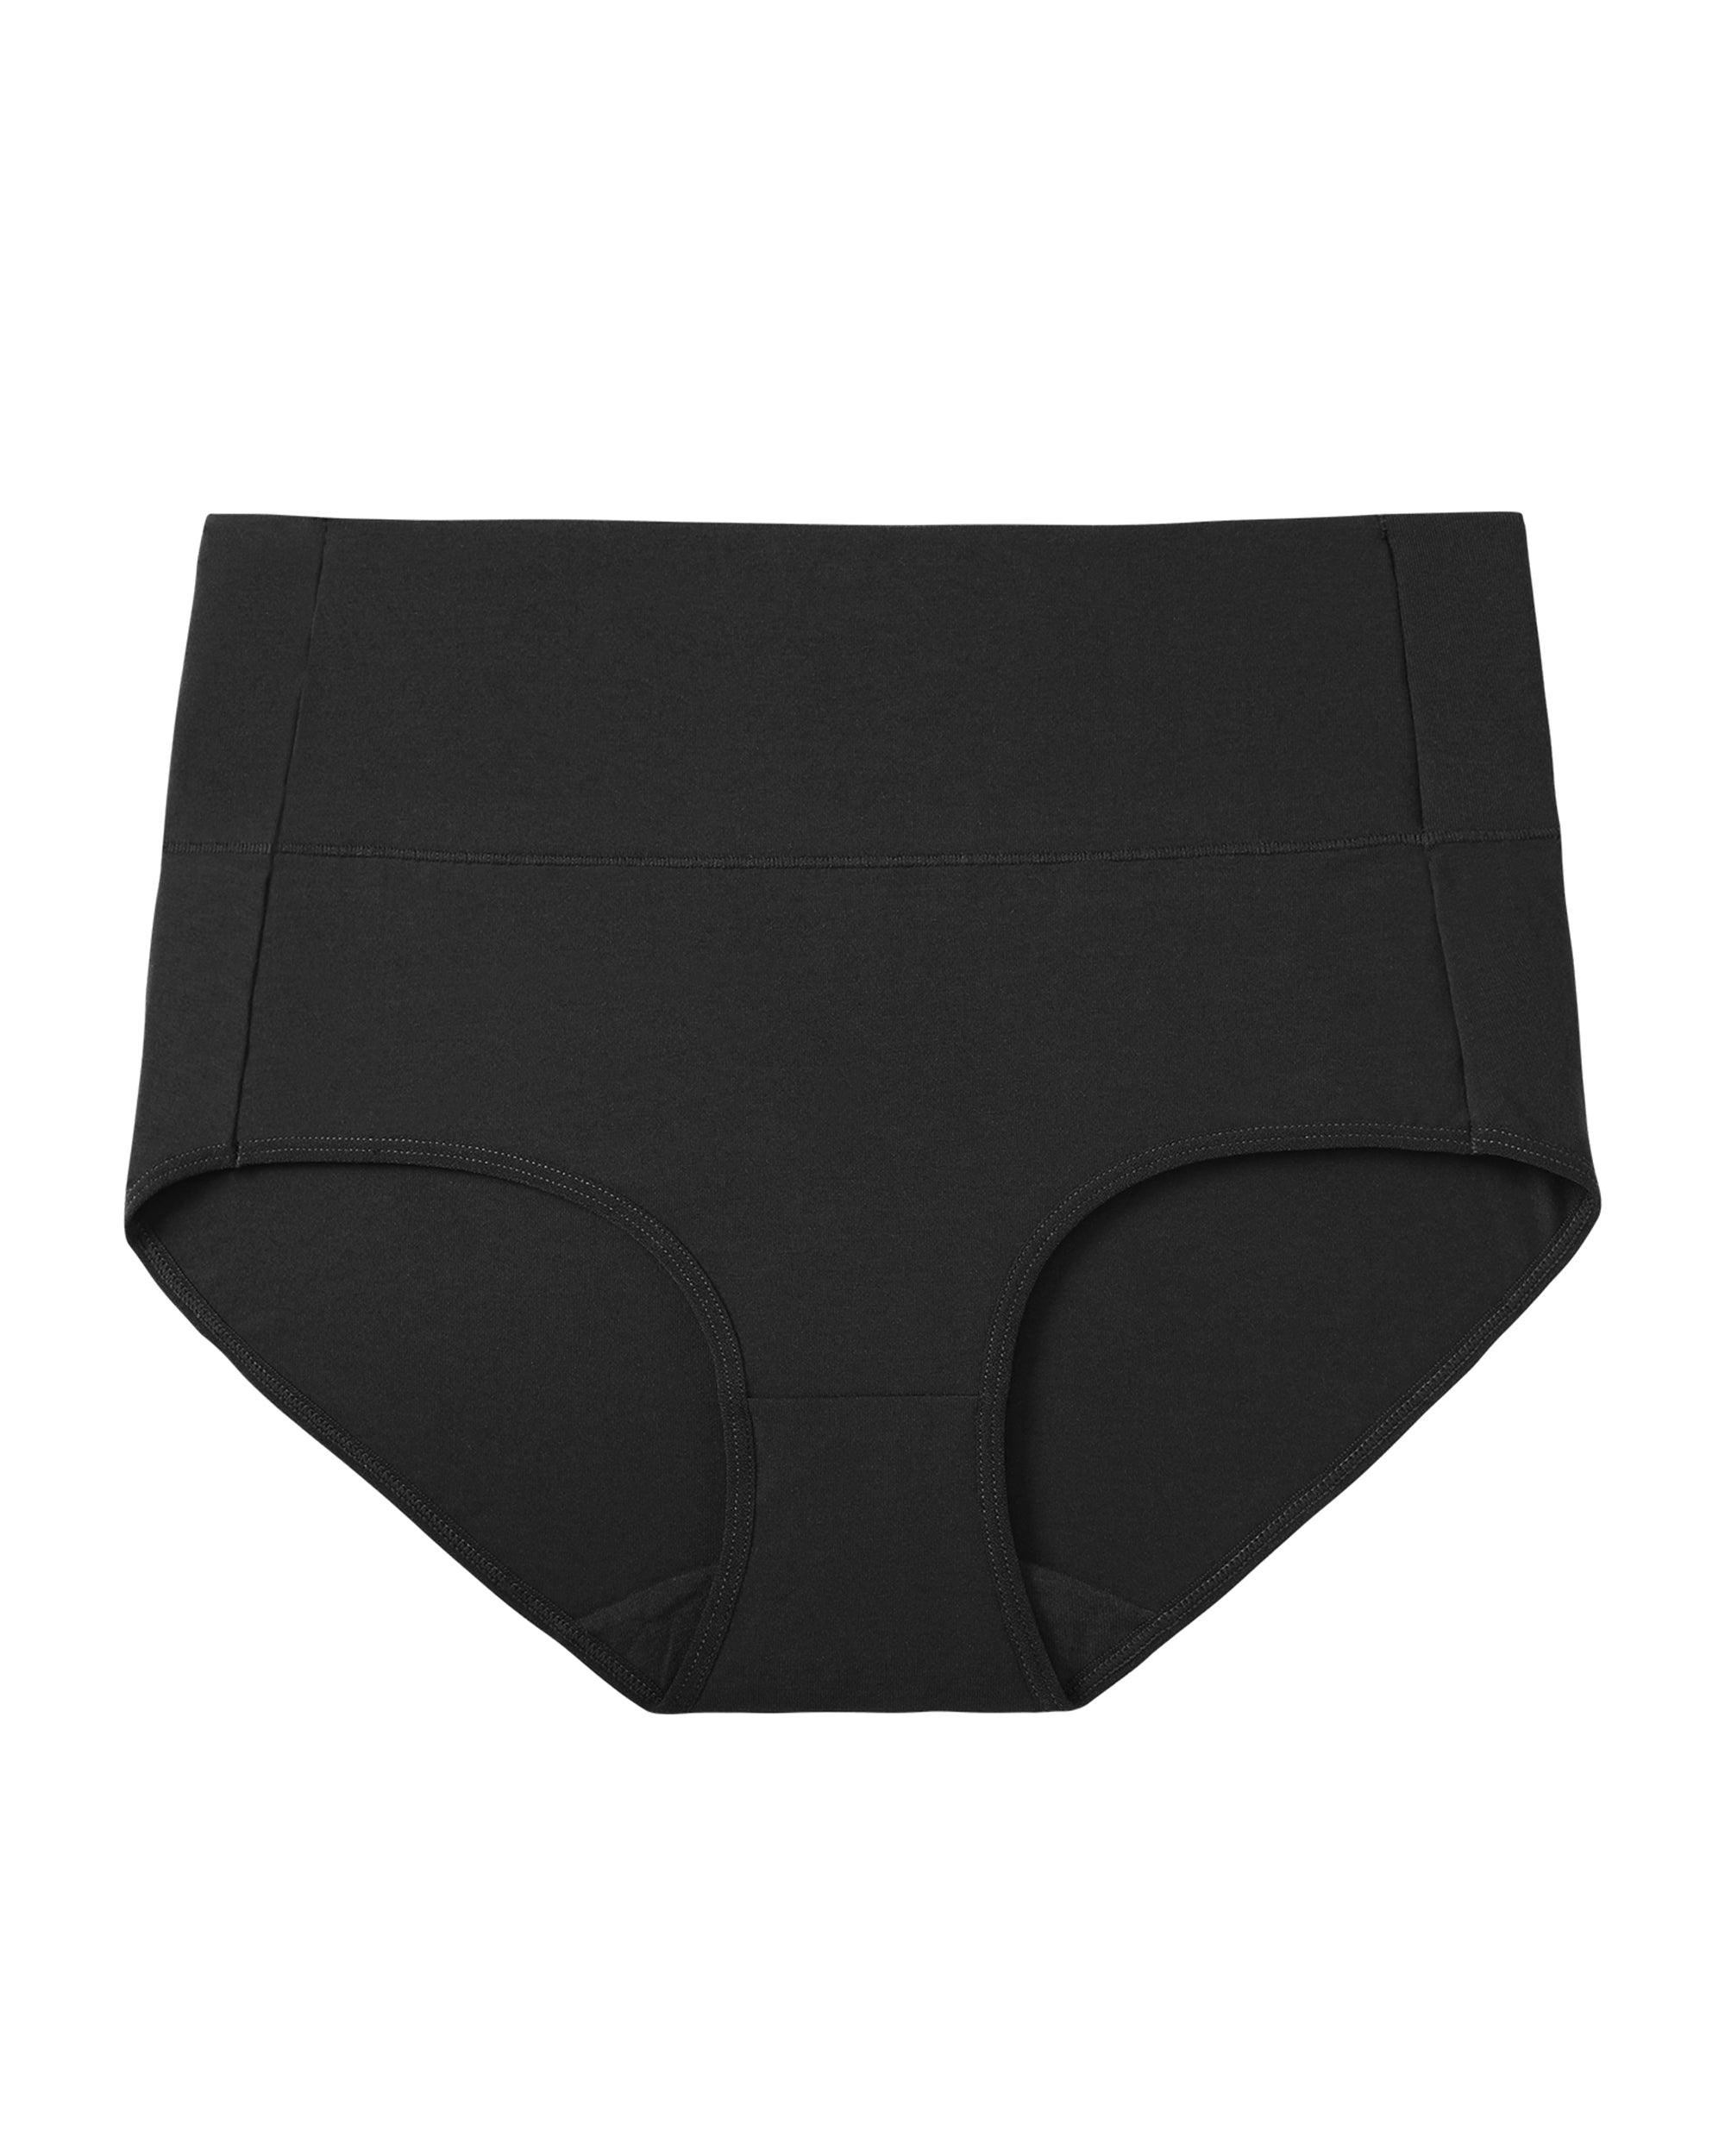 MISSWHO High Waisted C Section Postpartum Black Cotton Underwear Regular  Soft Stretch Briefs Tummy Control Pack Panties (Size 5,Small) at   Women's Clothing store